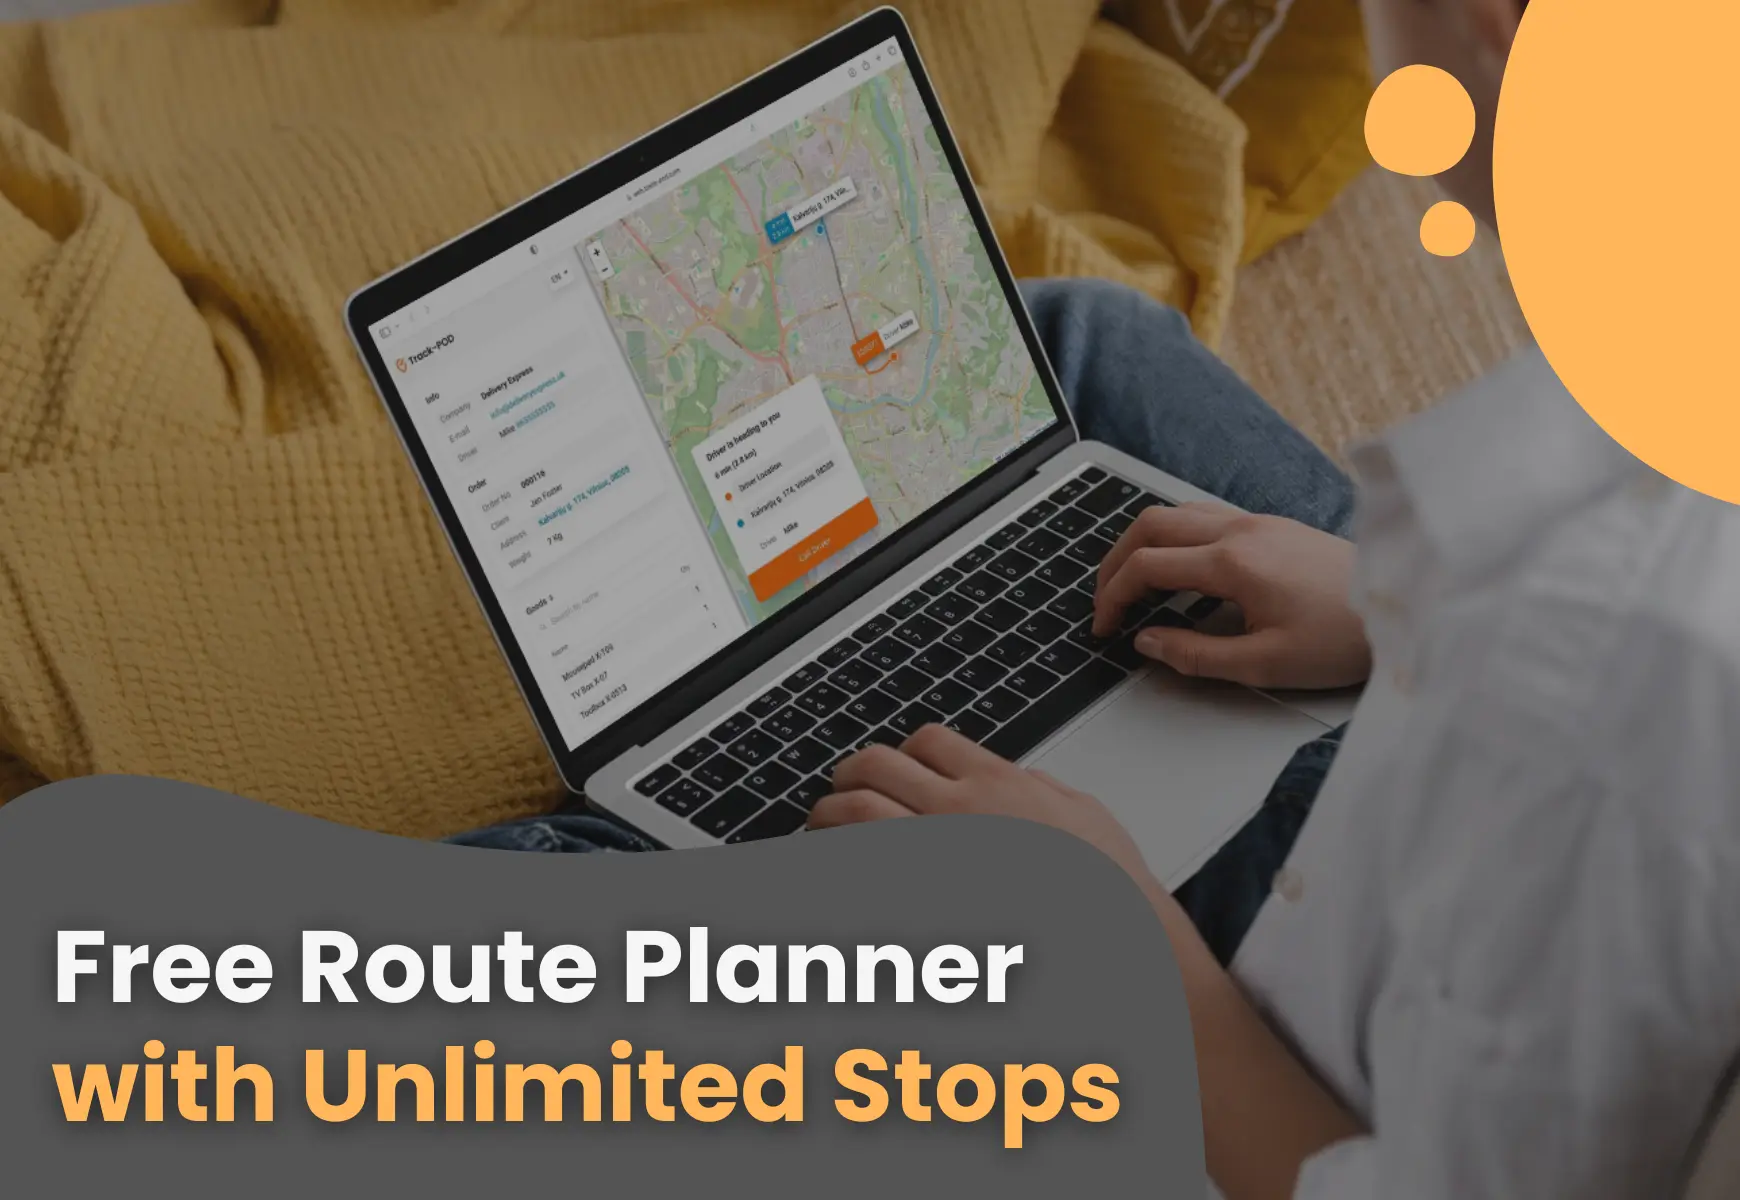 Free Route Planner with Unlimited Stops